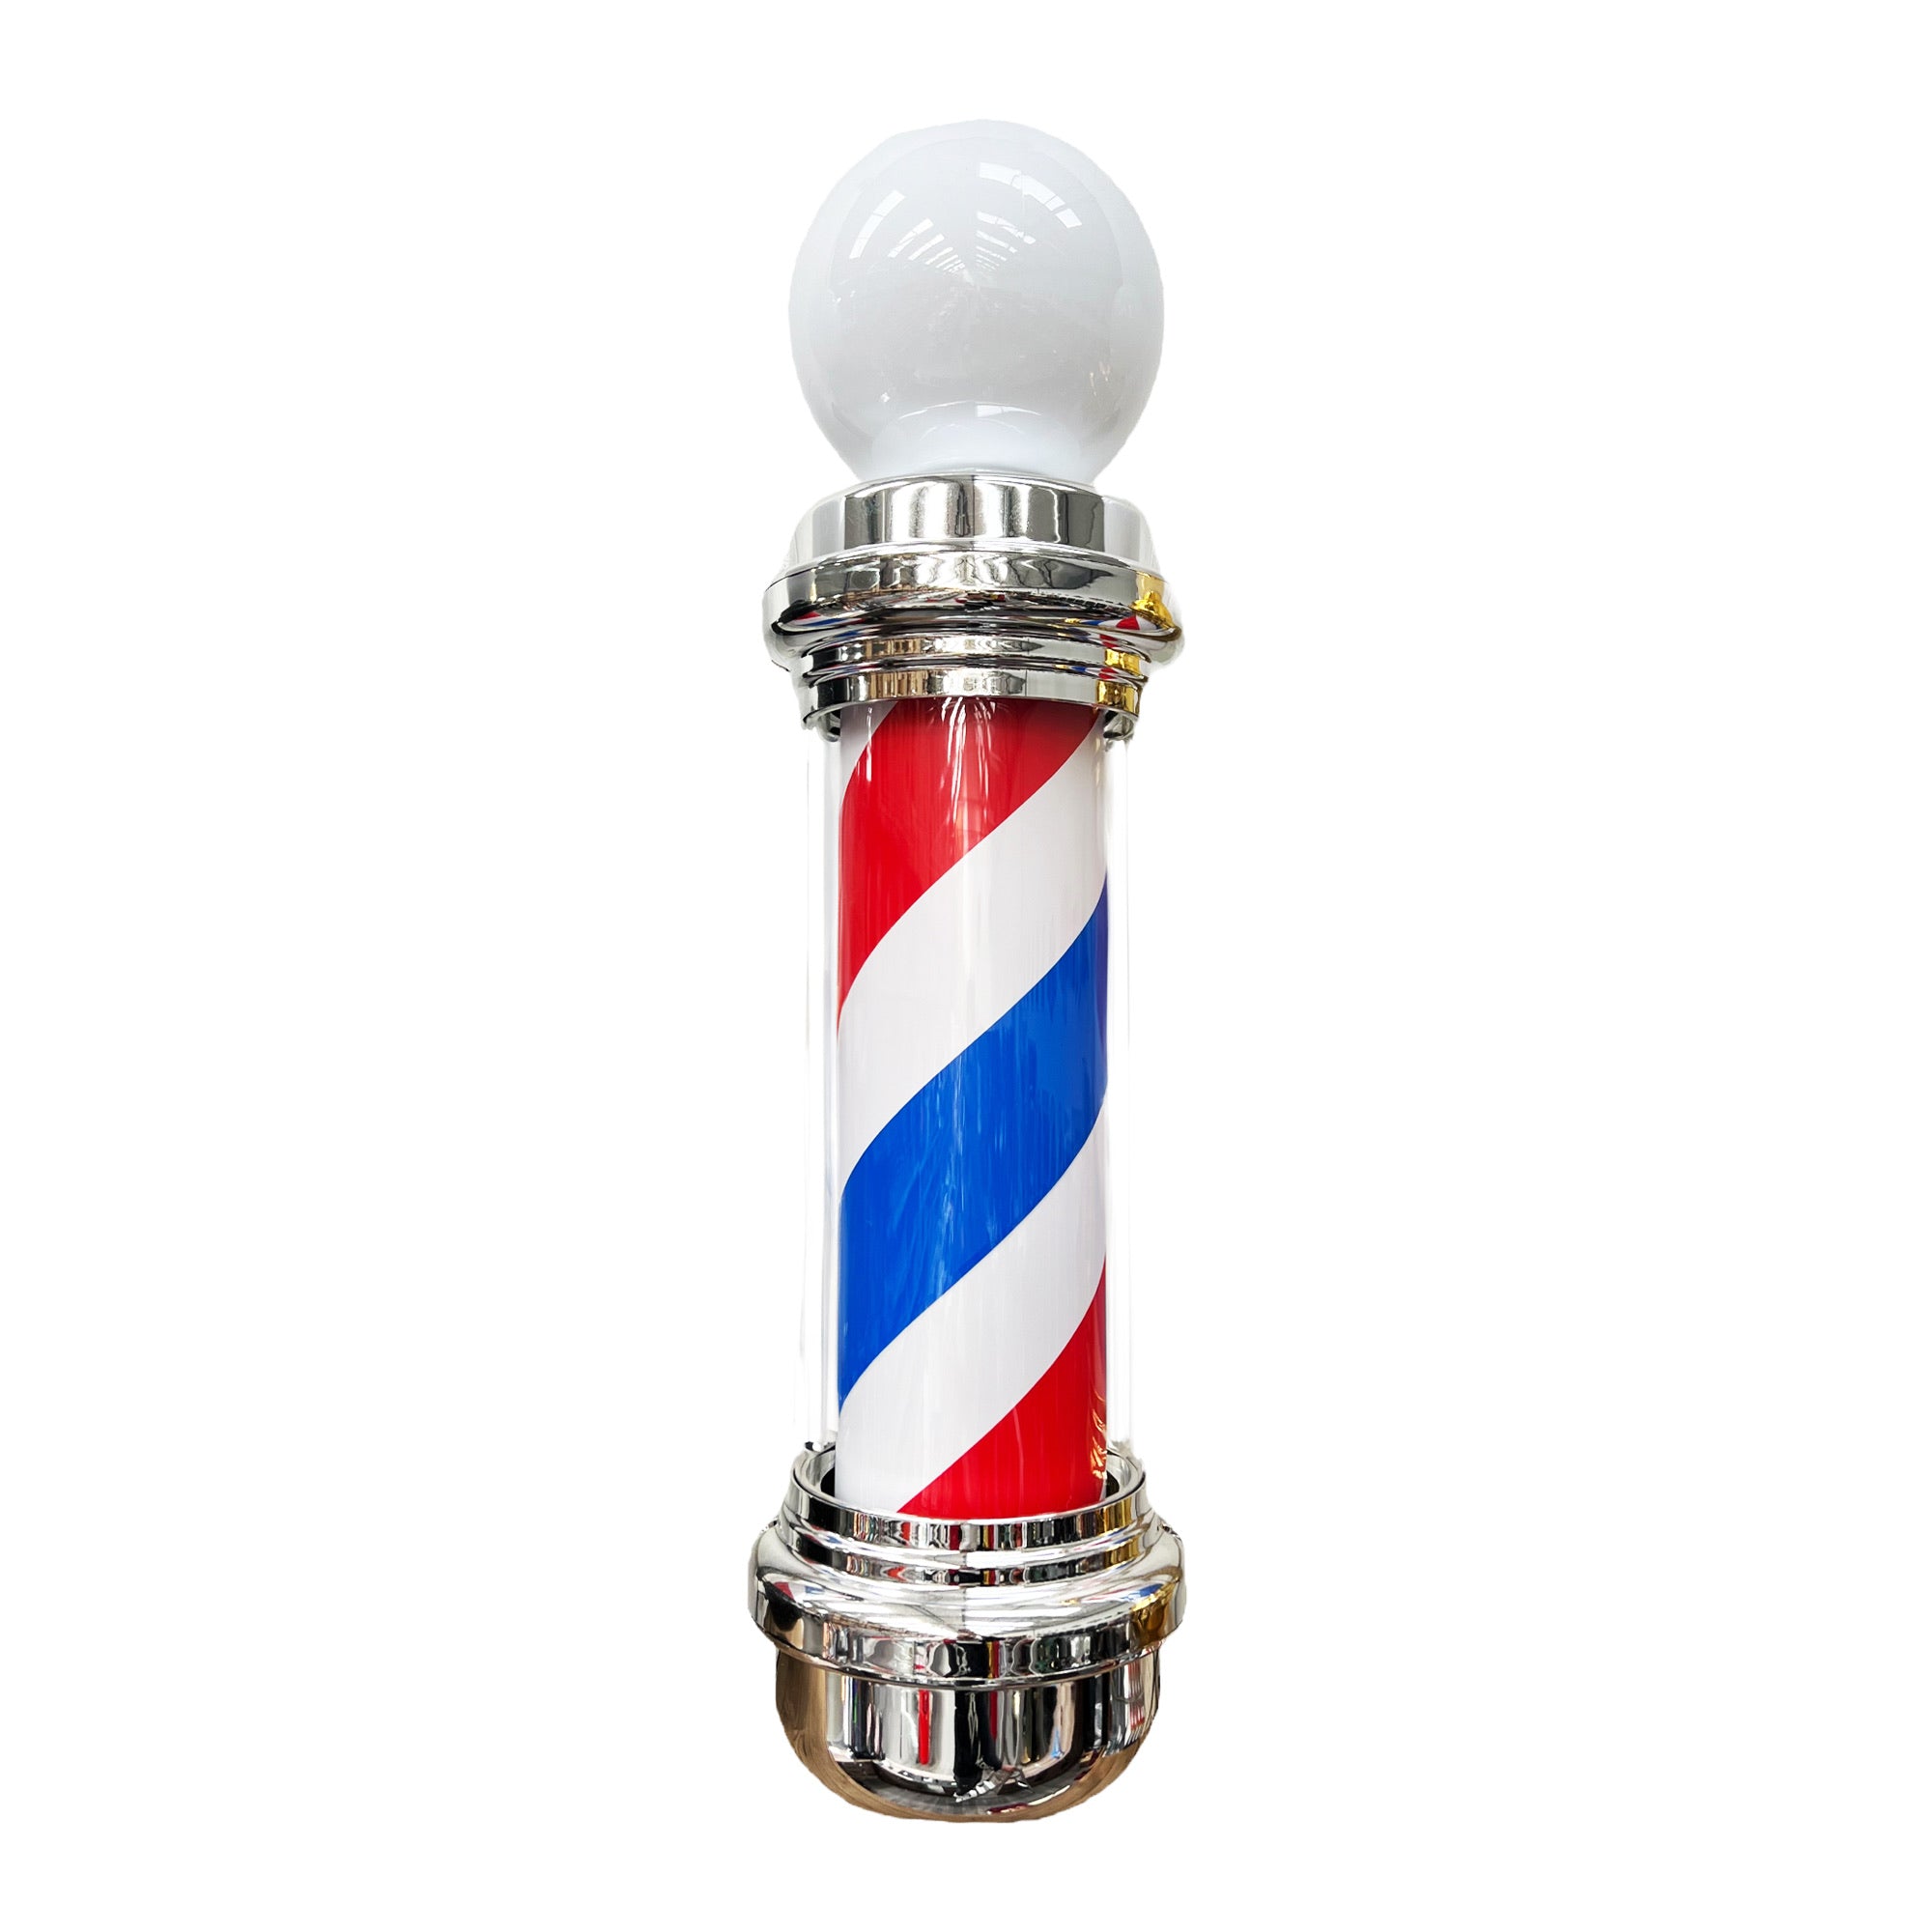 Gabri - Barber Pole Light With Open Sign (Silver Red White Blue Stripes) 85cm